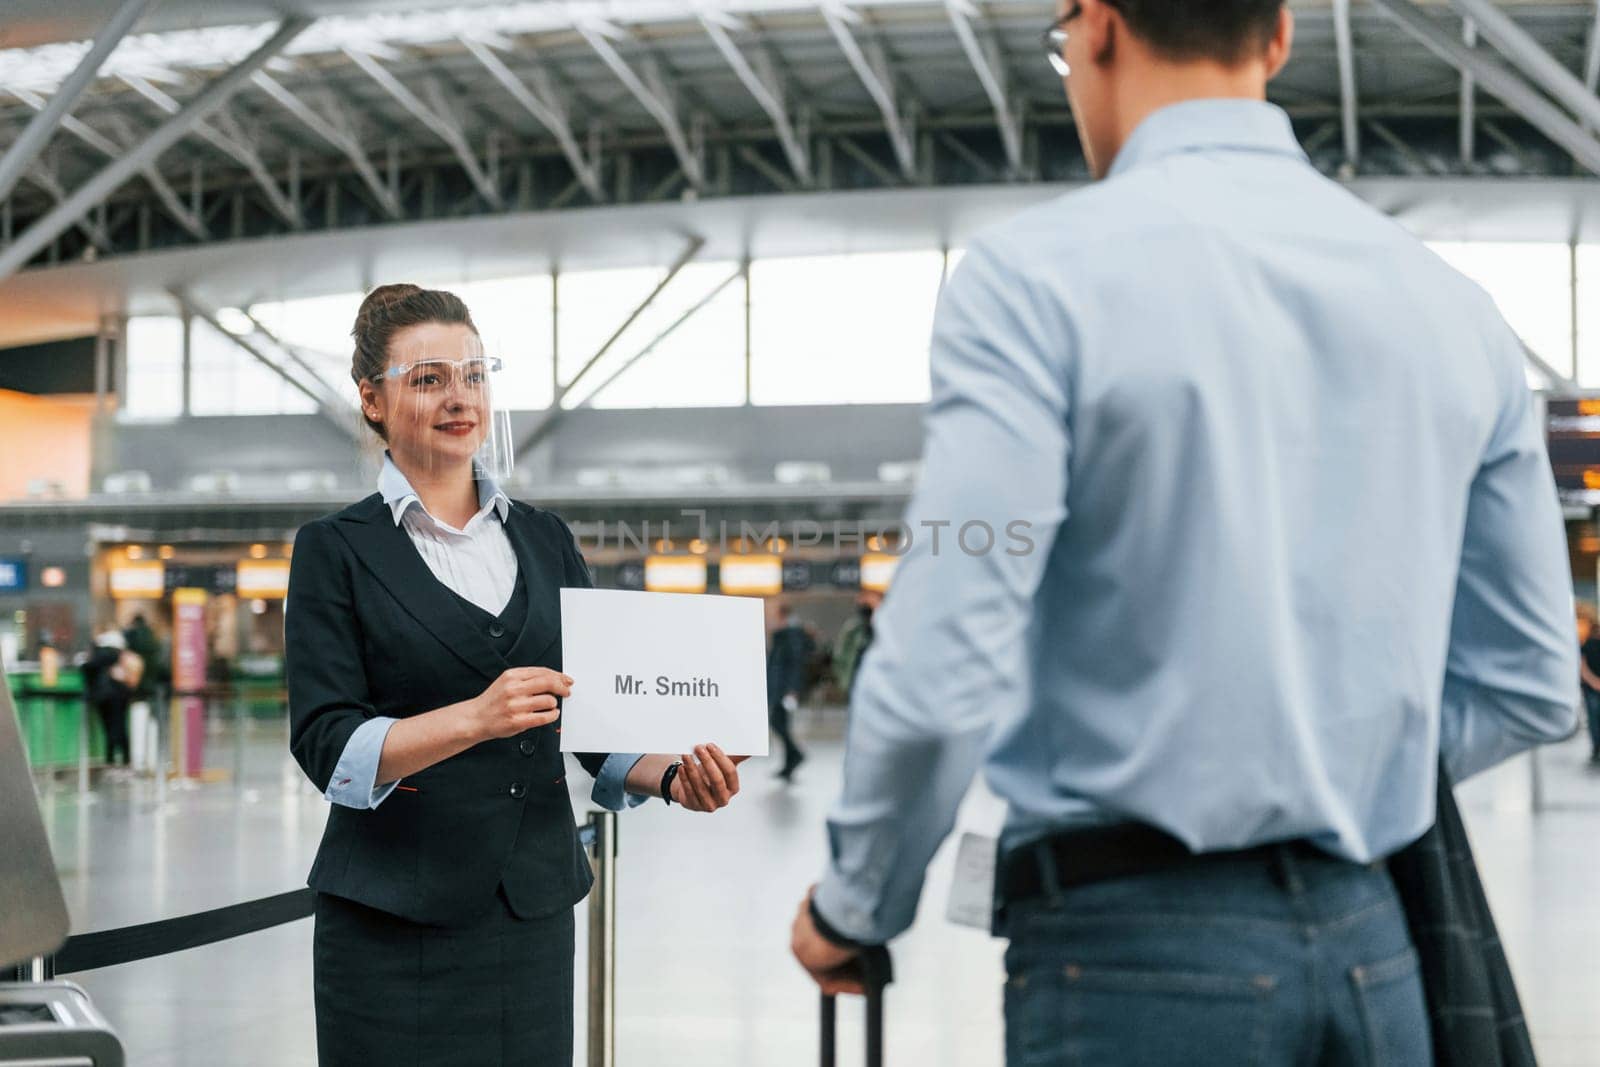 Meet by the woman with text. Young businessman in formal clothes is in the airport at daytime.